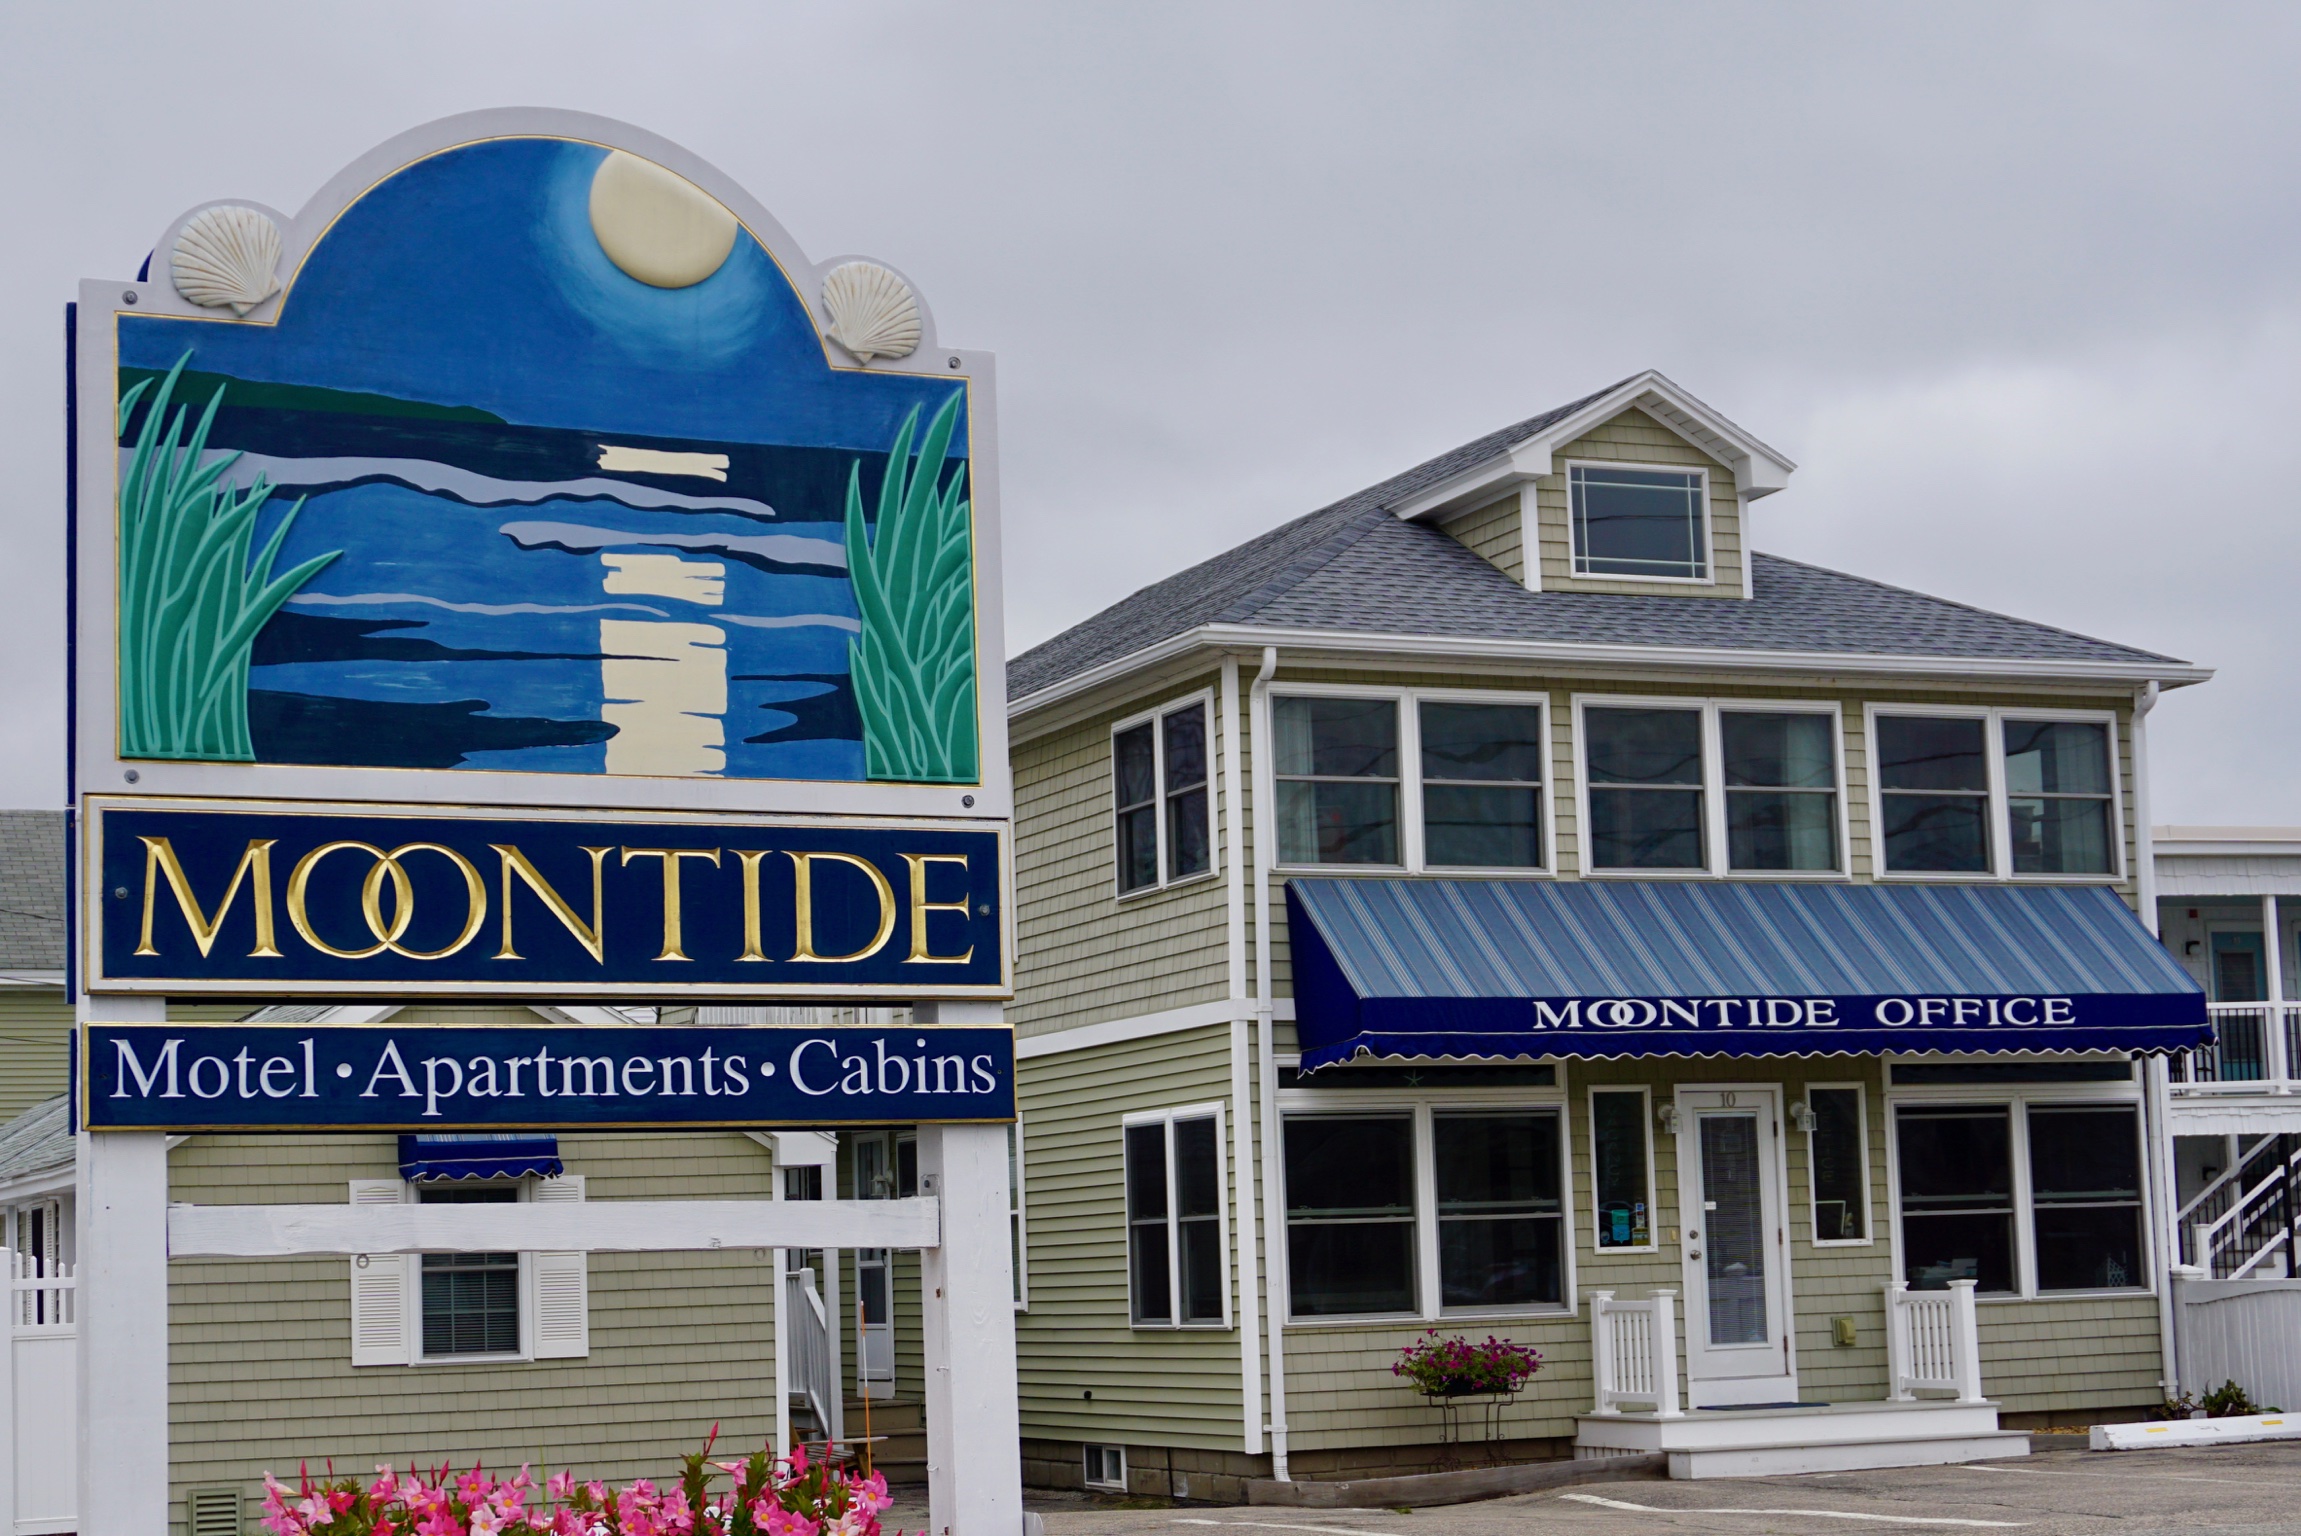 Moontide Motel - lodging old orchard beach